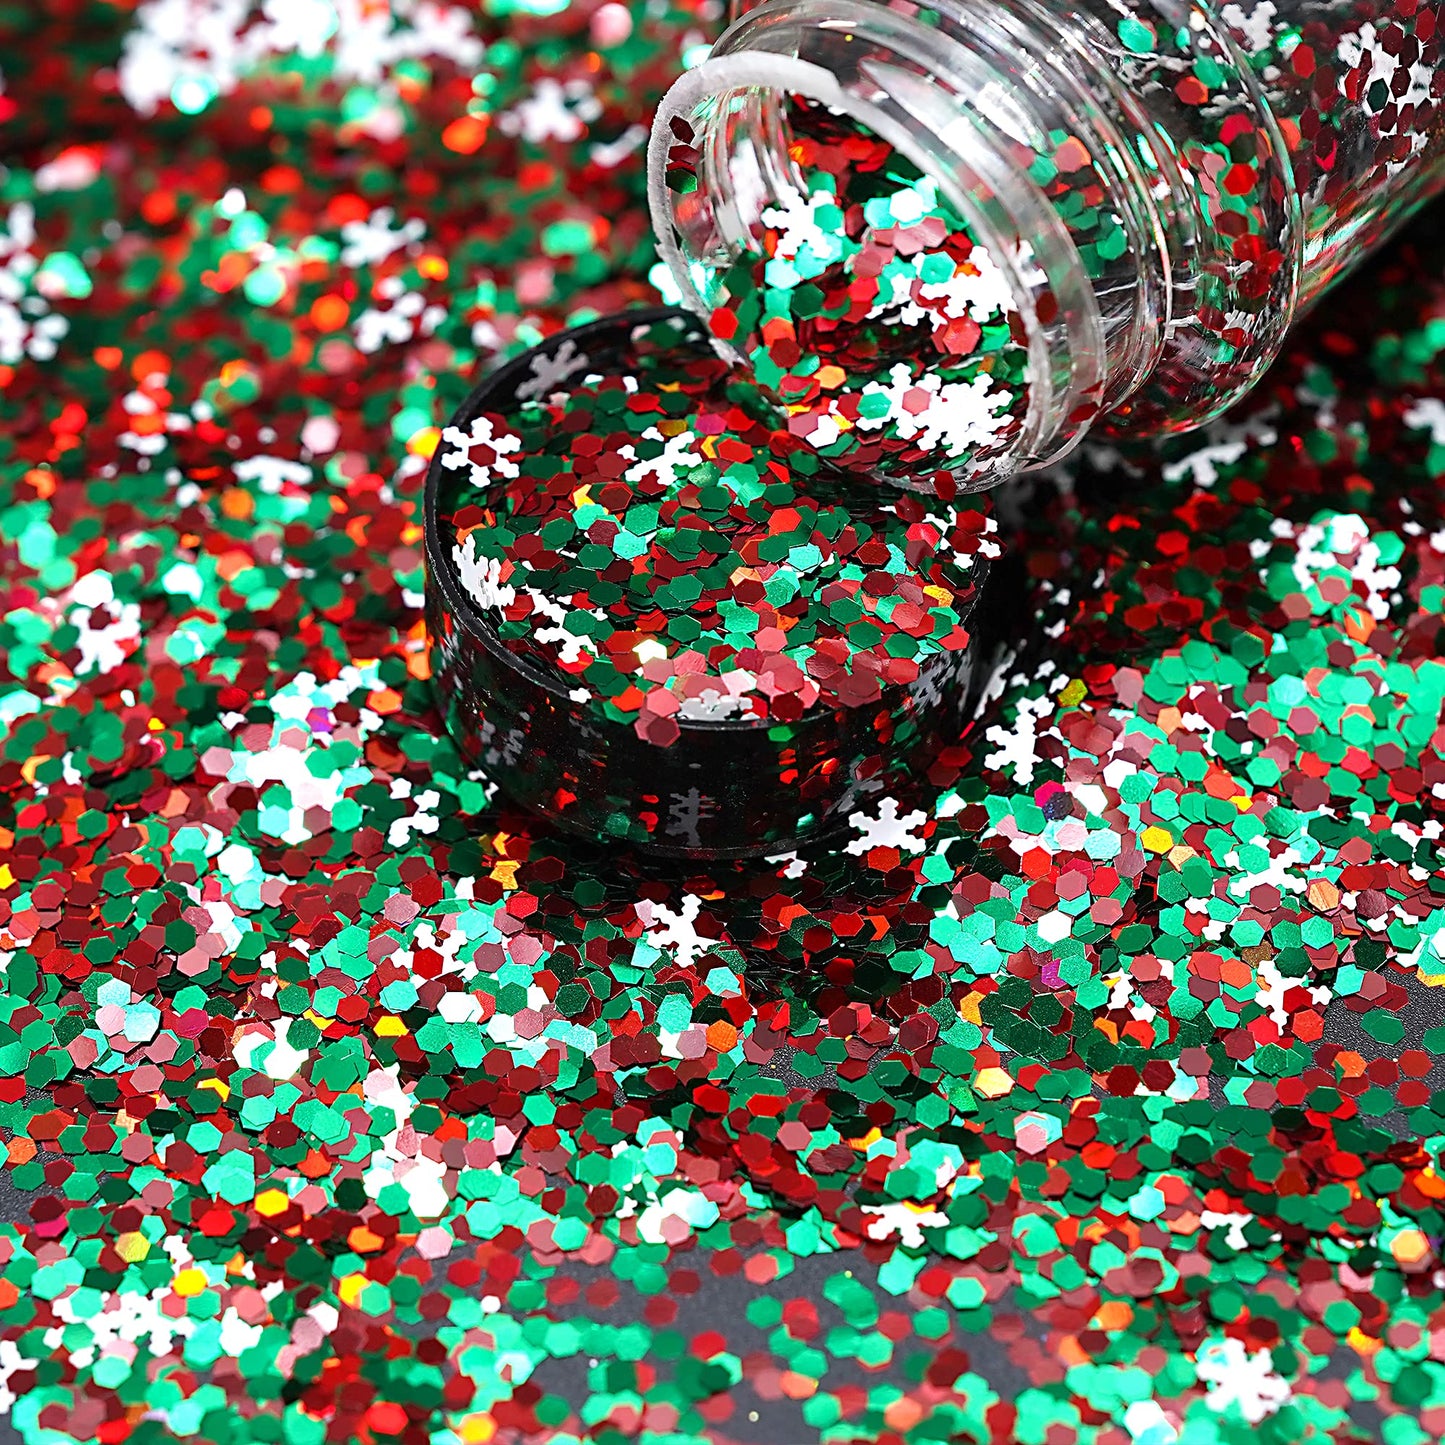 Christmas Nail Sequins,100g Christmas Glitter, Cosmetic Craft Holographic Glitter for Epoxy Resin, Laser Snowflake Christmas Tree Flakesfor Festival Nail Art Design or Make Up, Festival Decor（SD-10）